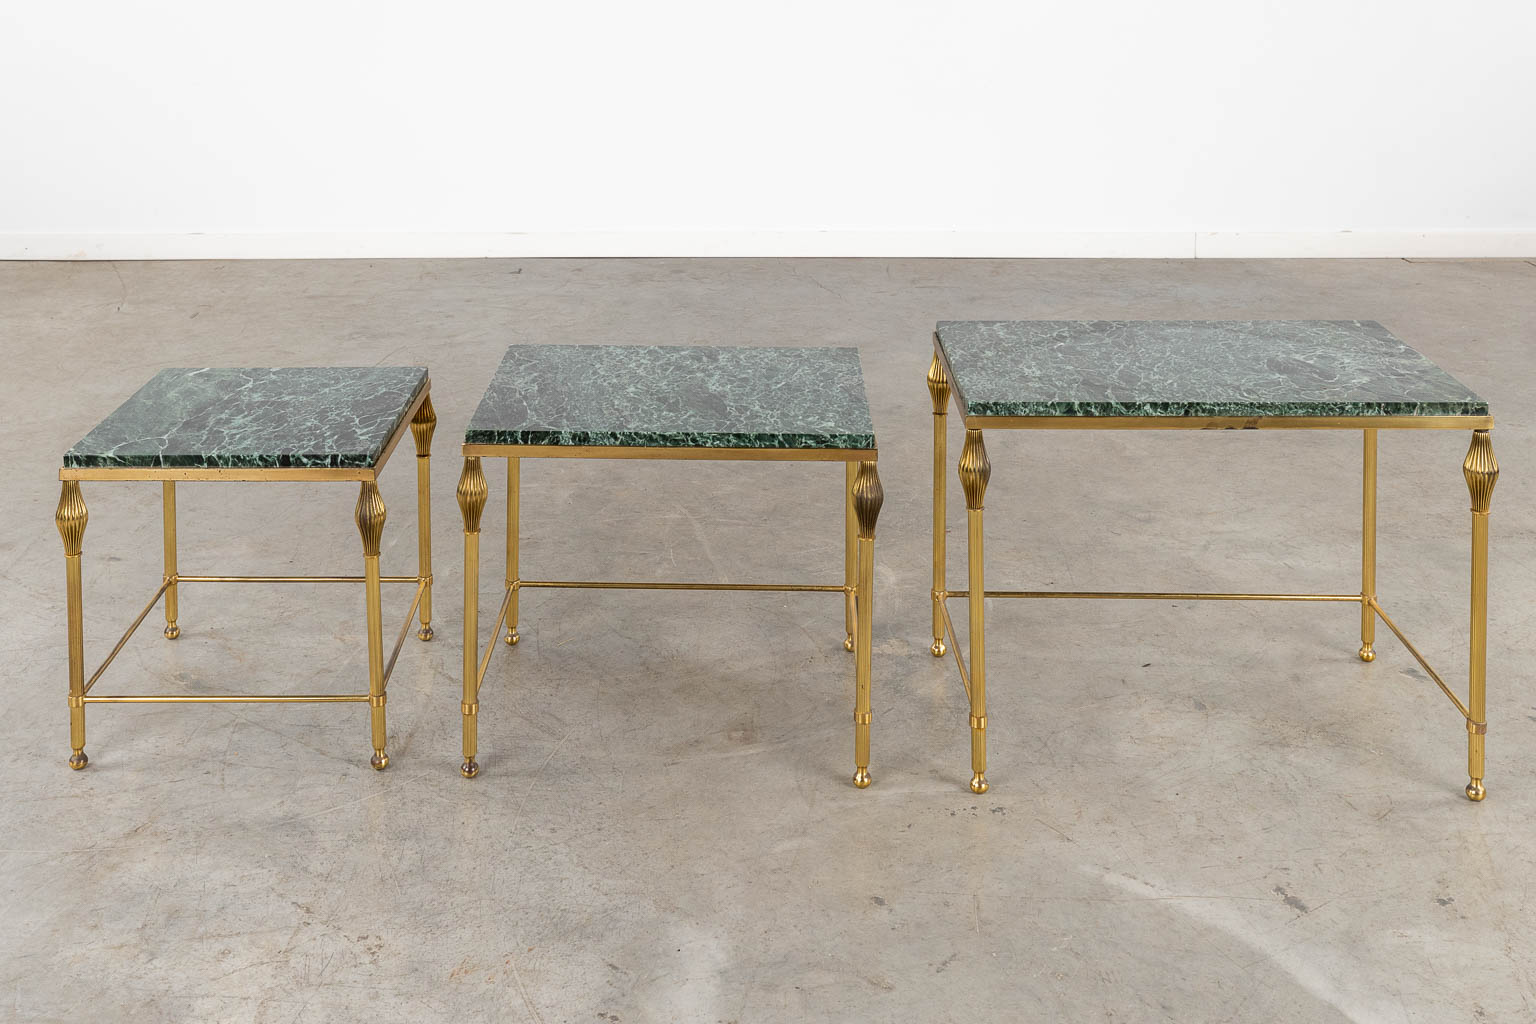 A three-piece set of nesting tables, gilt metal and a green marble. (D:37 x W:56 x H:45 cm)